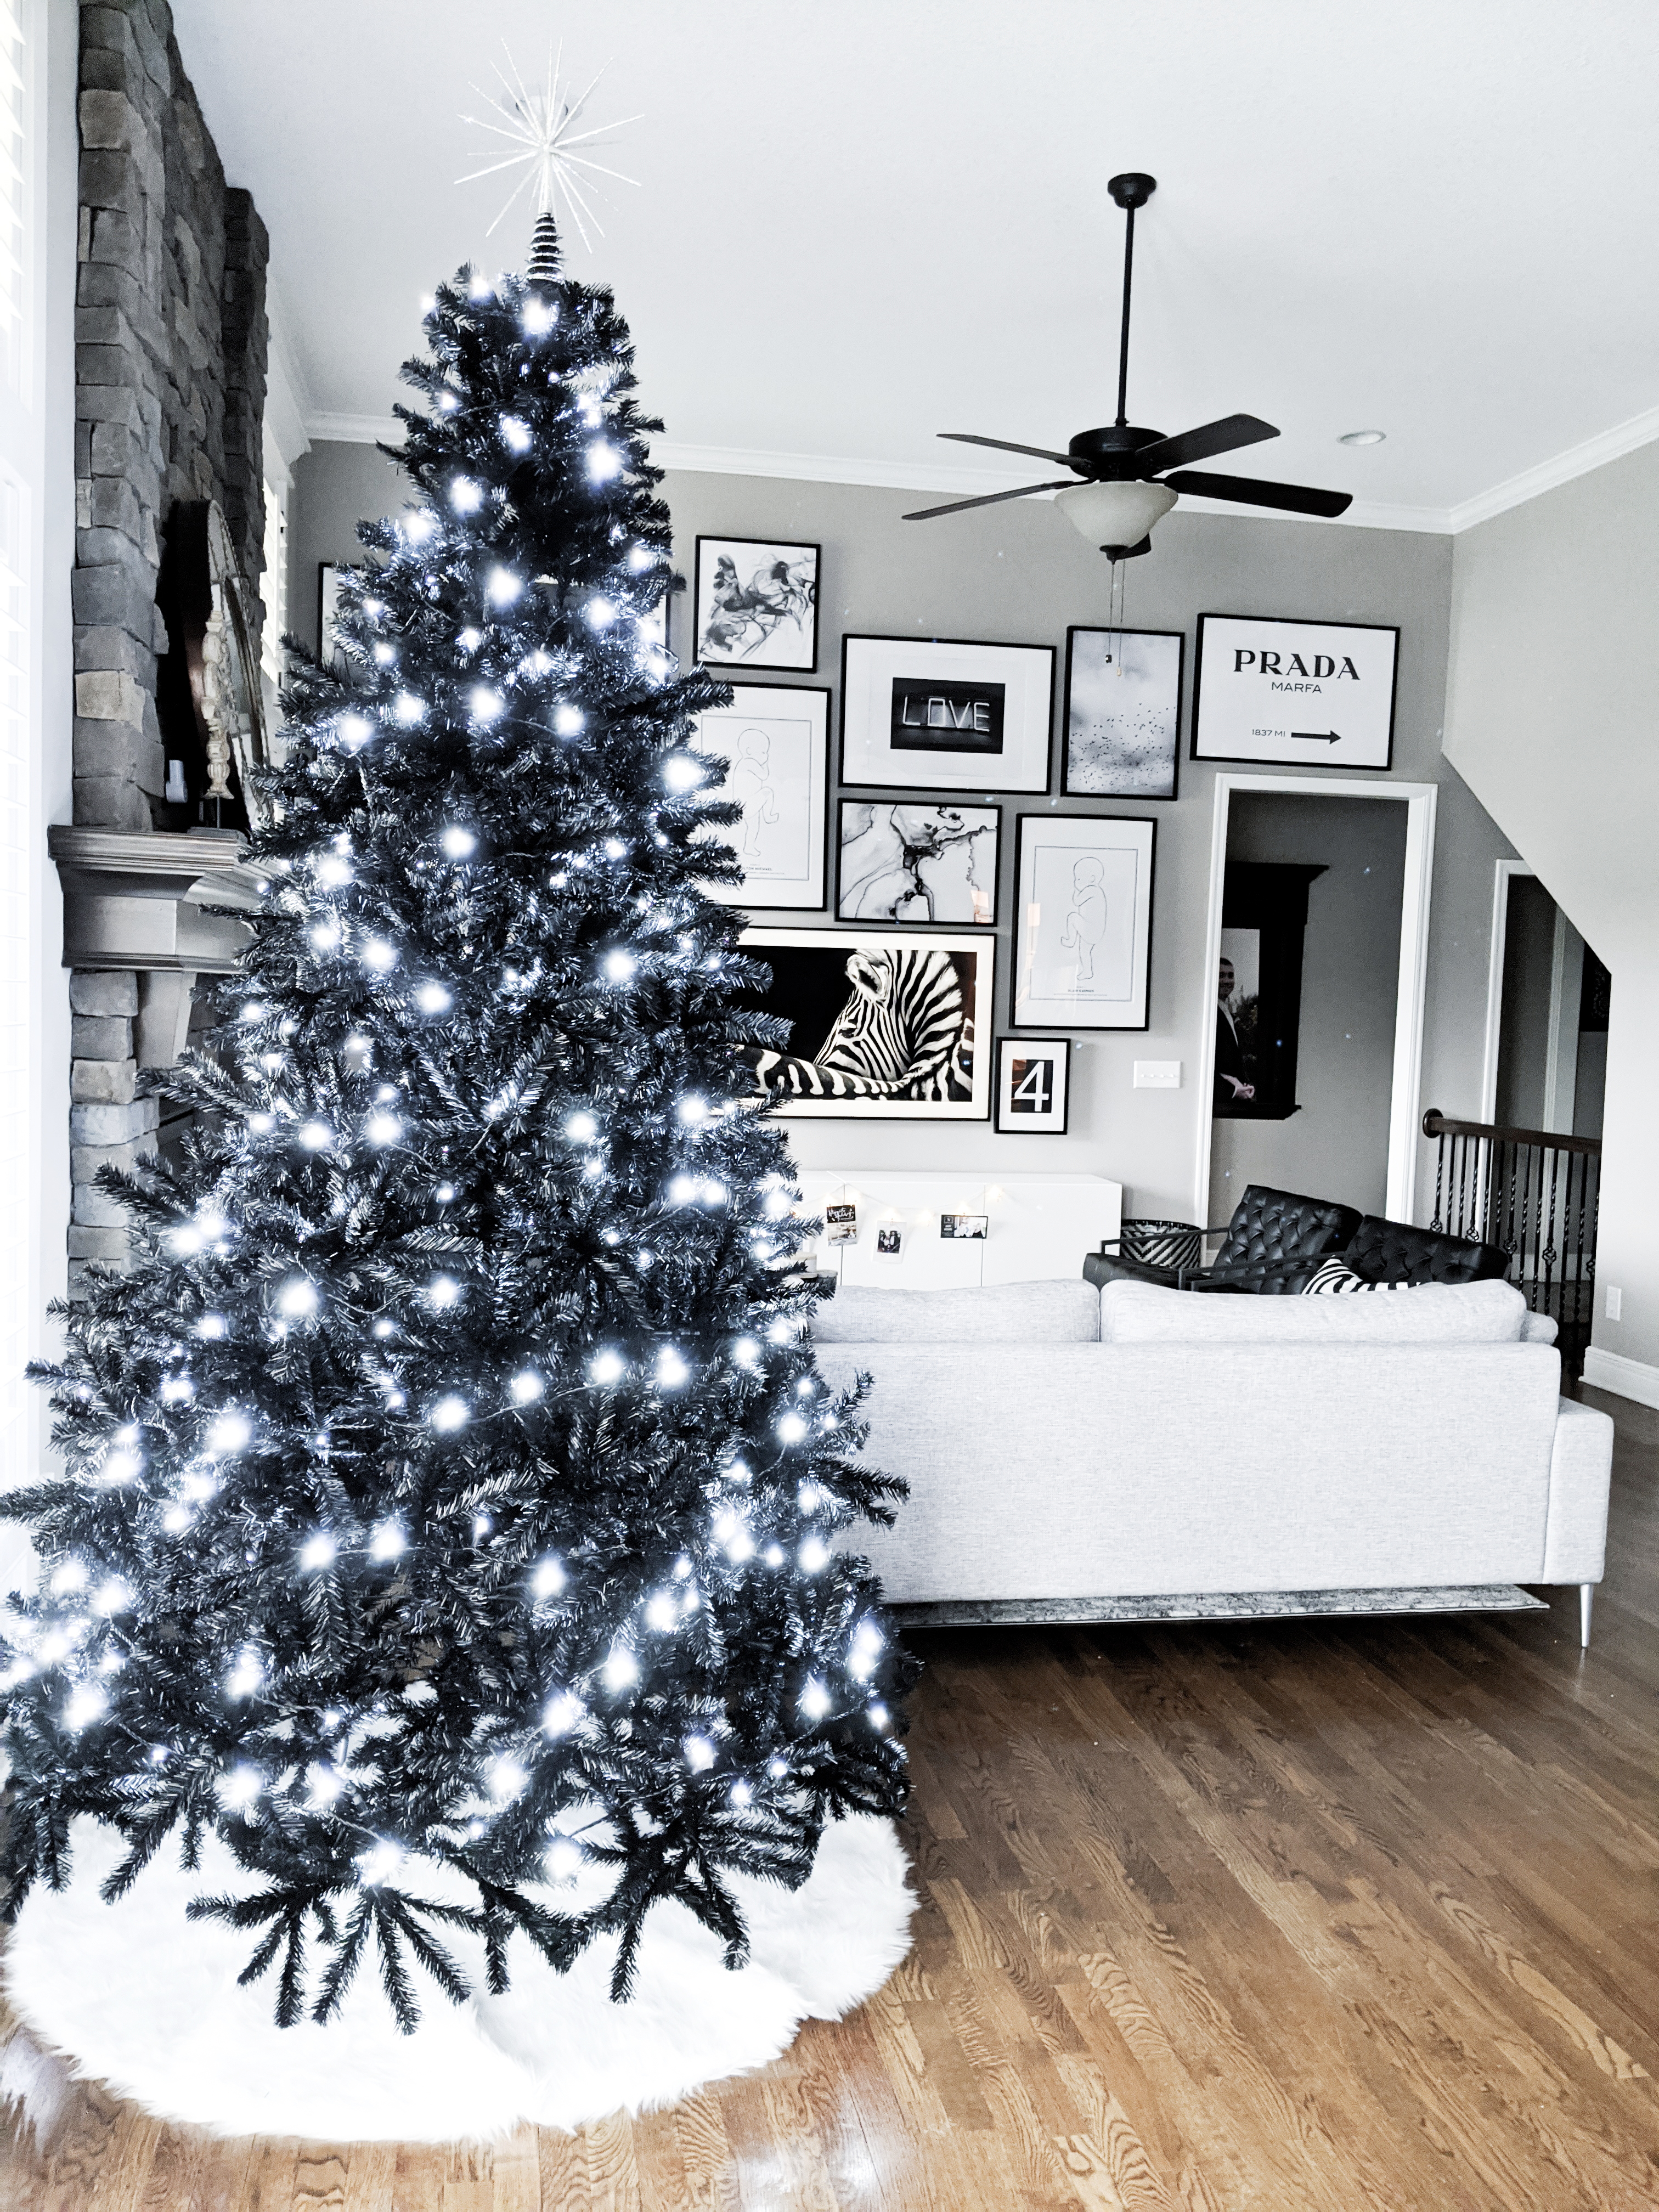 Black Christmas Tree - Modern Christmas Decor: A black Christmas tree is sophisticated, stylish, and unexpected. See how to decorate a black Christmas tree for modern Christmas decor! (Sponsored by Wayfair). #modernhome #christmasdecor #christmastree